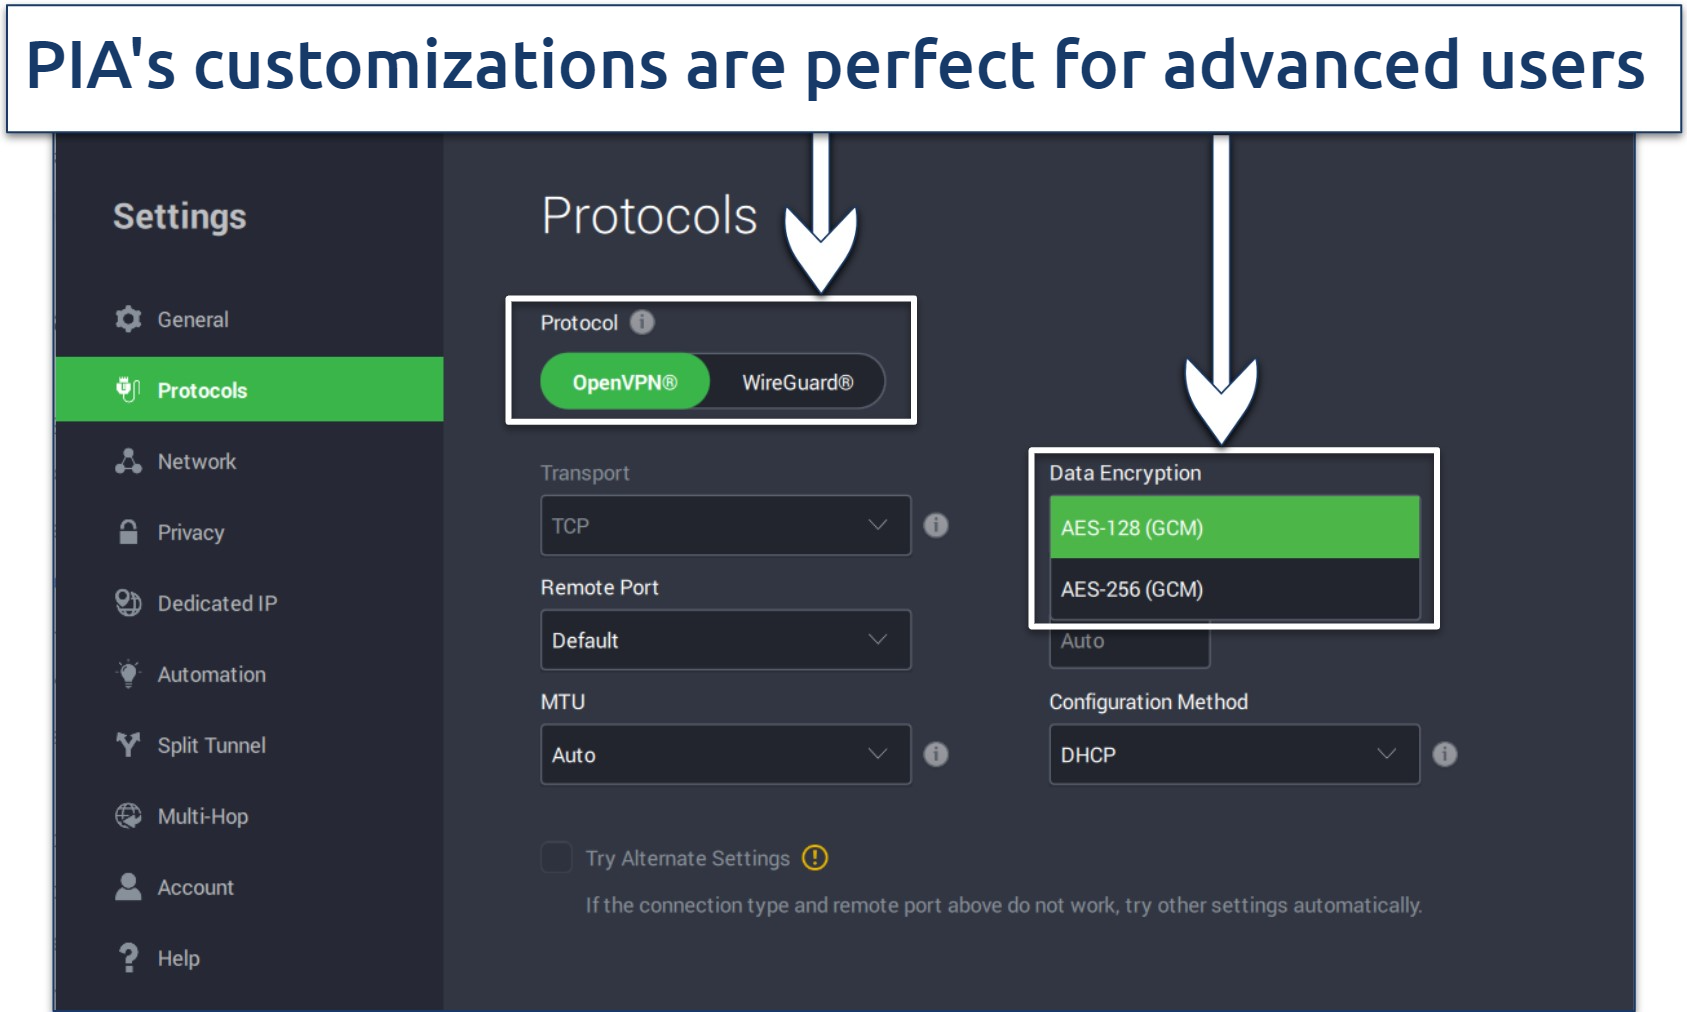 Screenshot showing how to customize your VPN connection with PIA